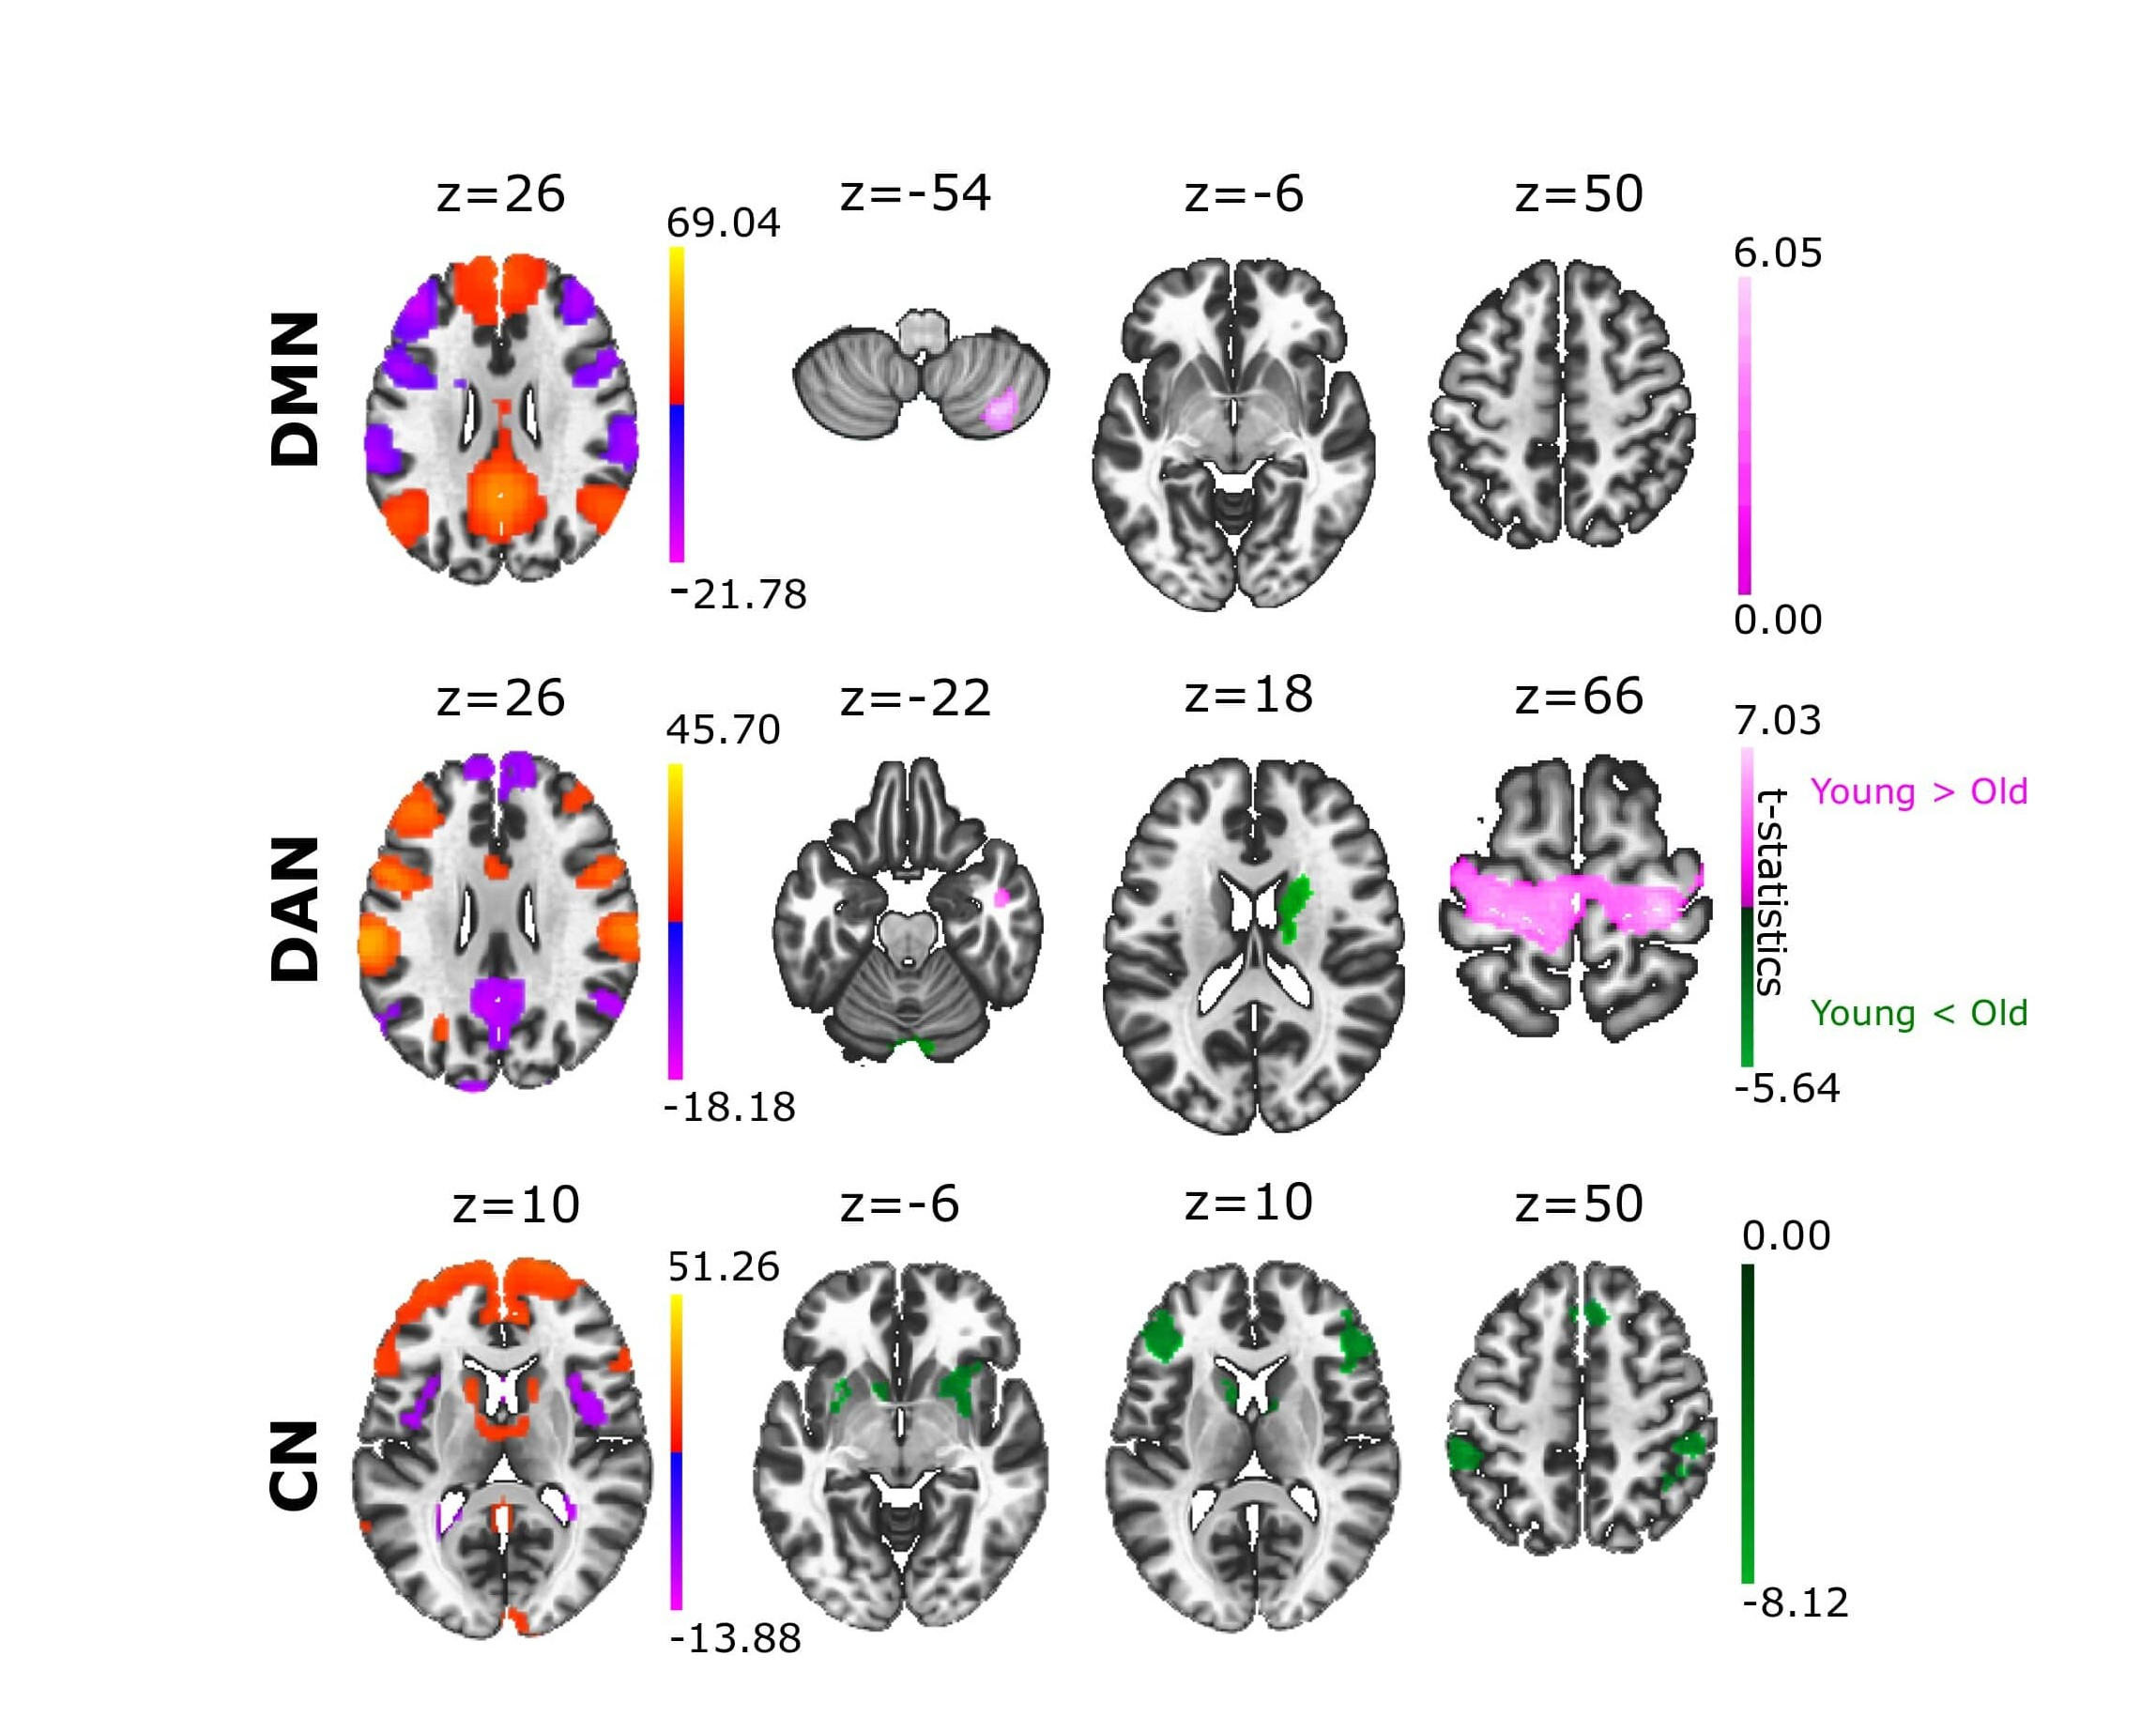 The structure of anticorrelated networks in the human brain